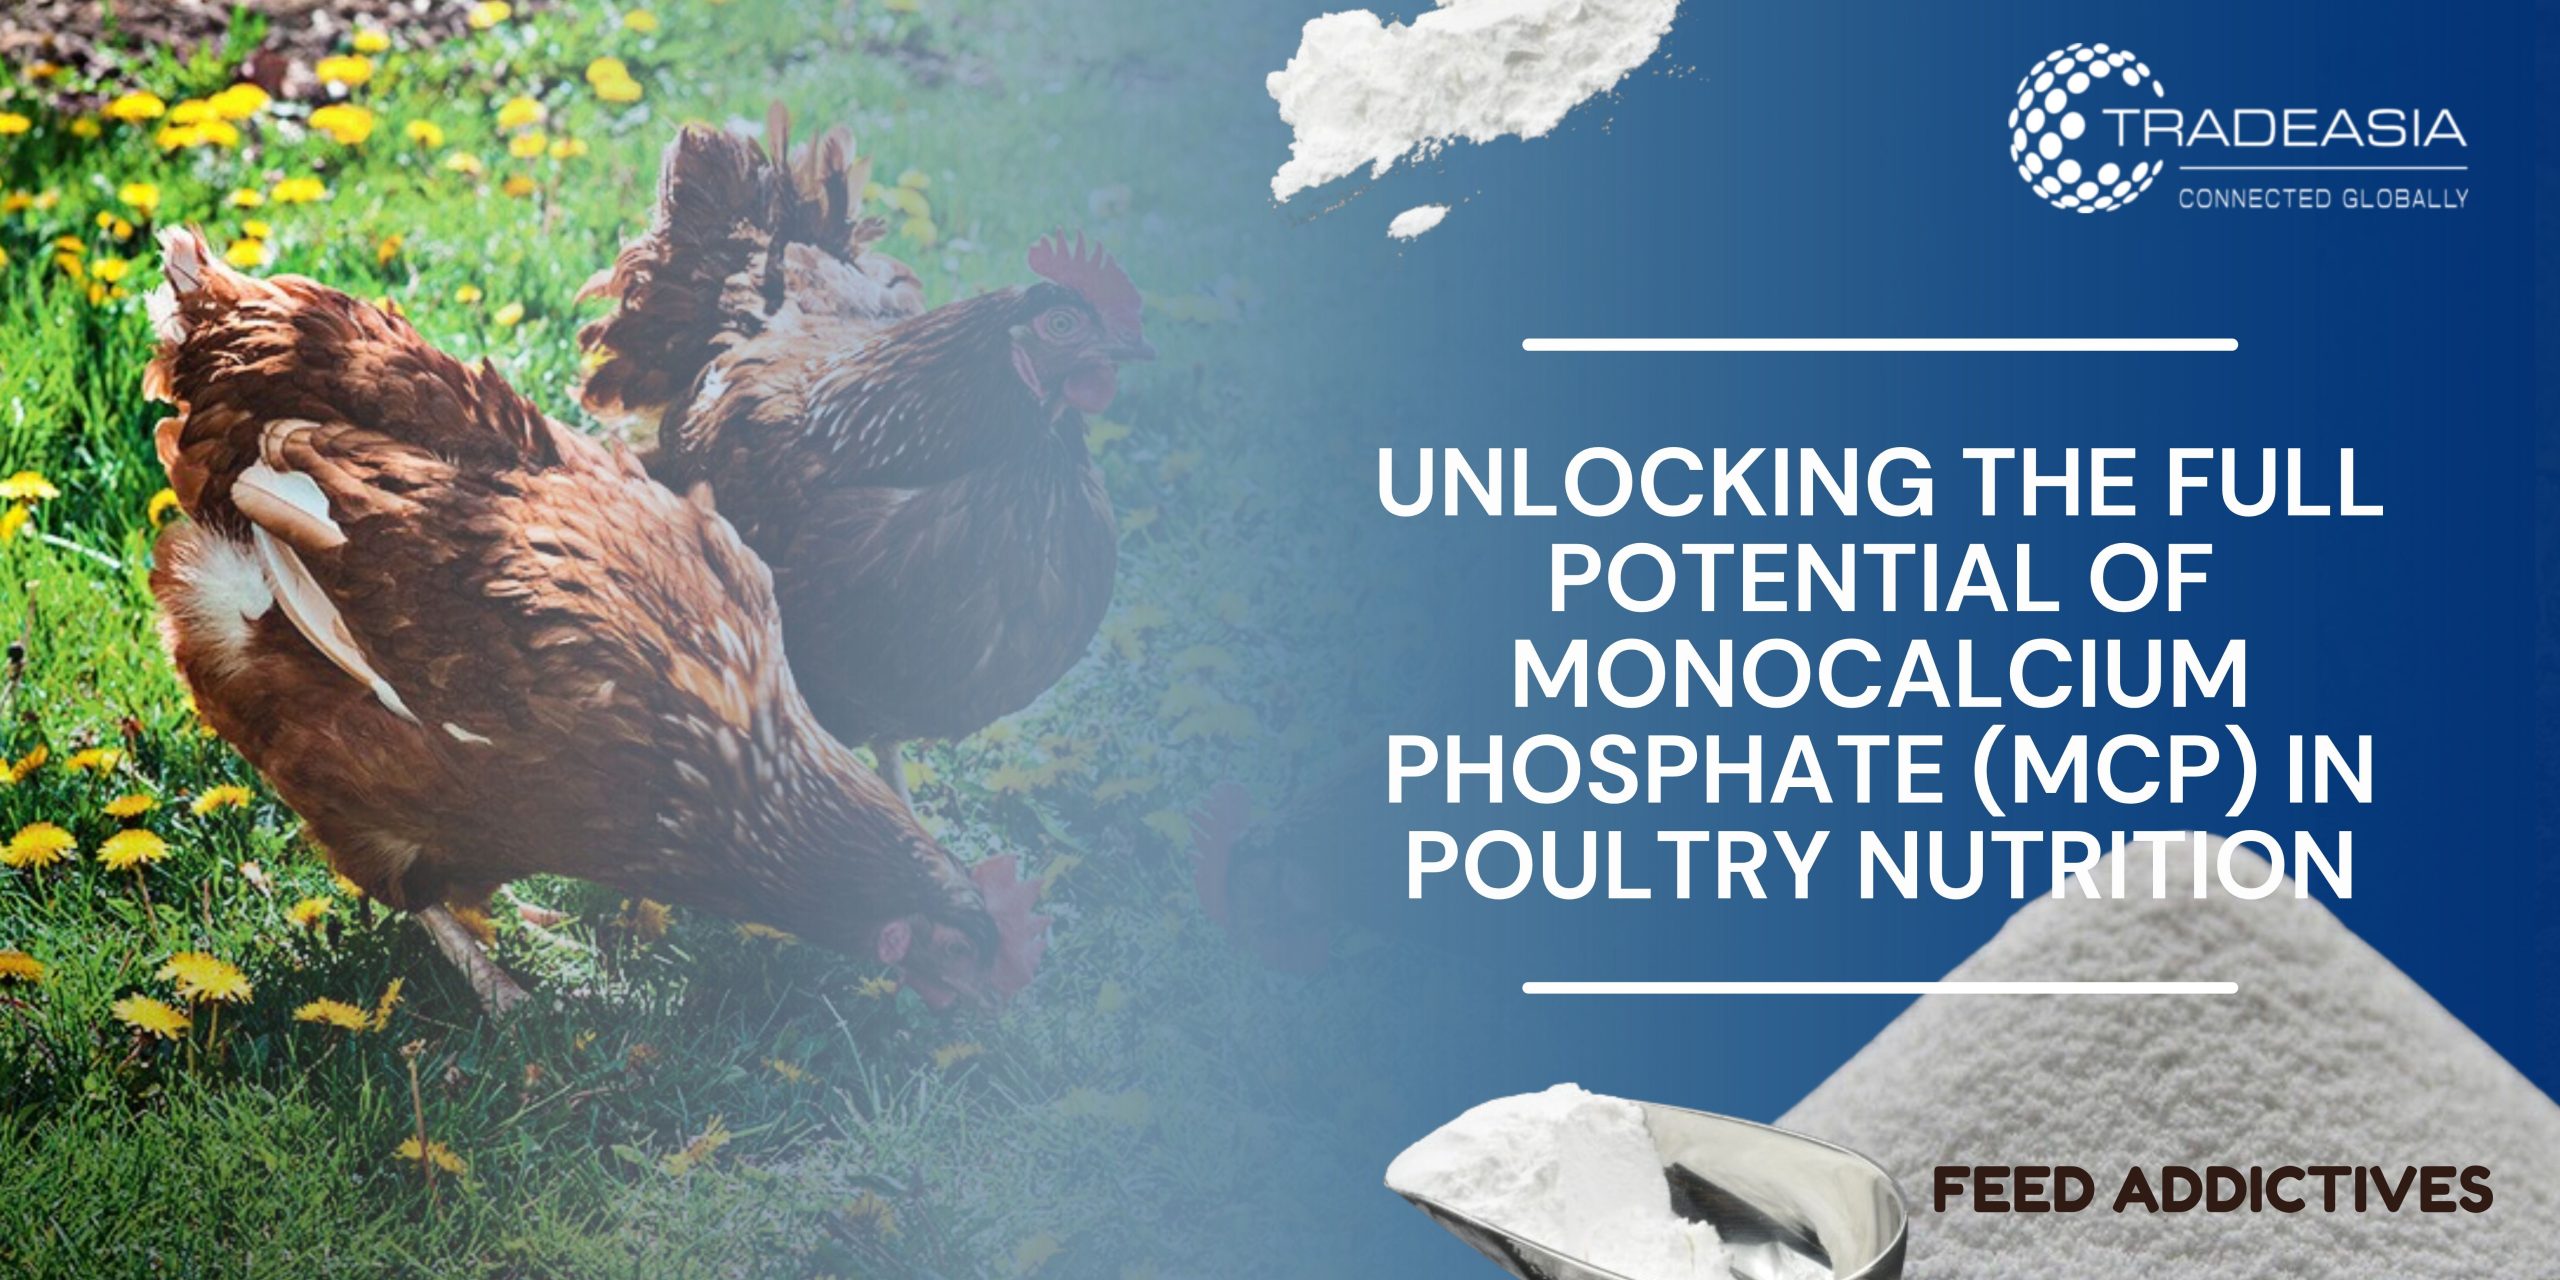 Unlocking the Full Potential of Monocalcium Phosphate (MCP) in Poultry Nutrition